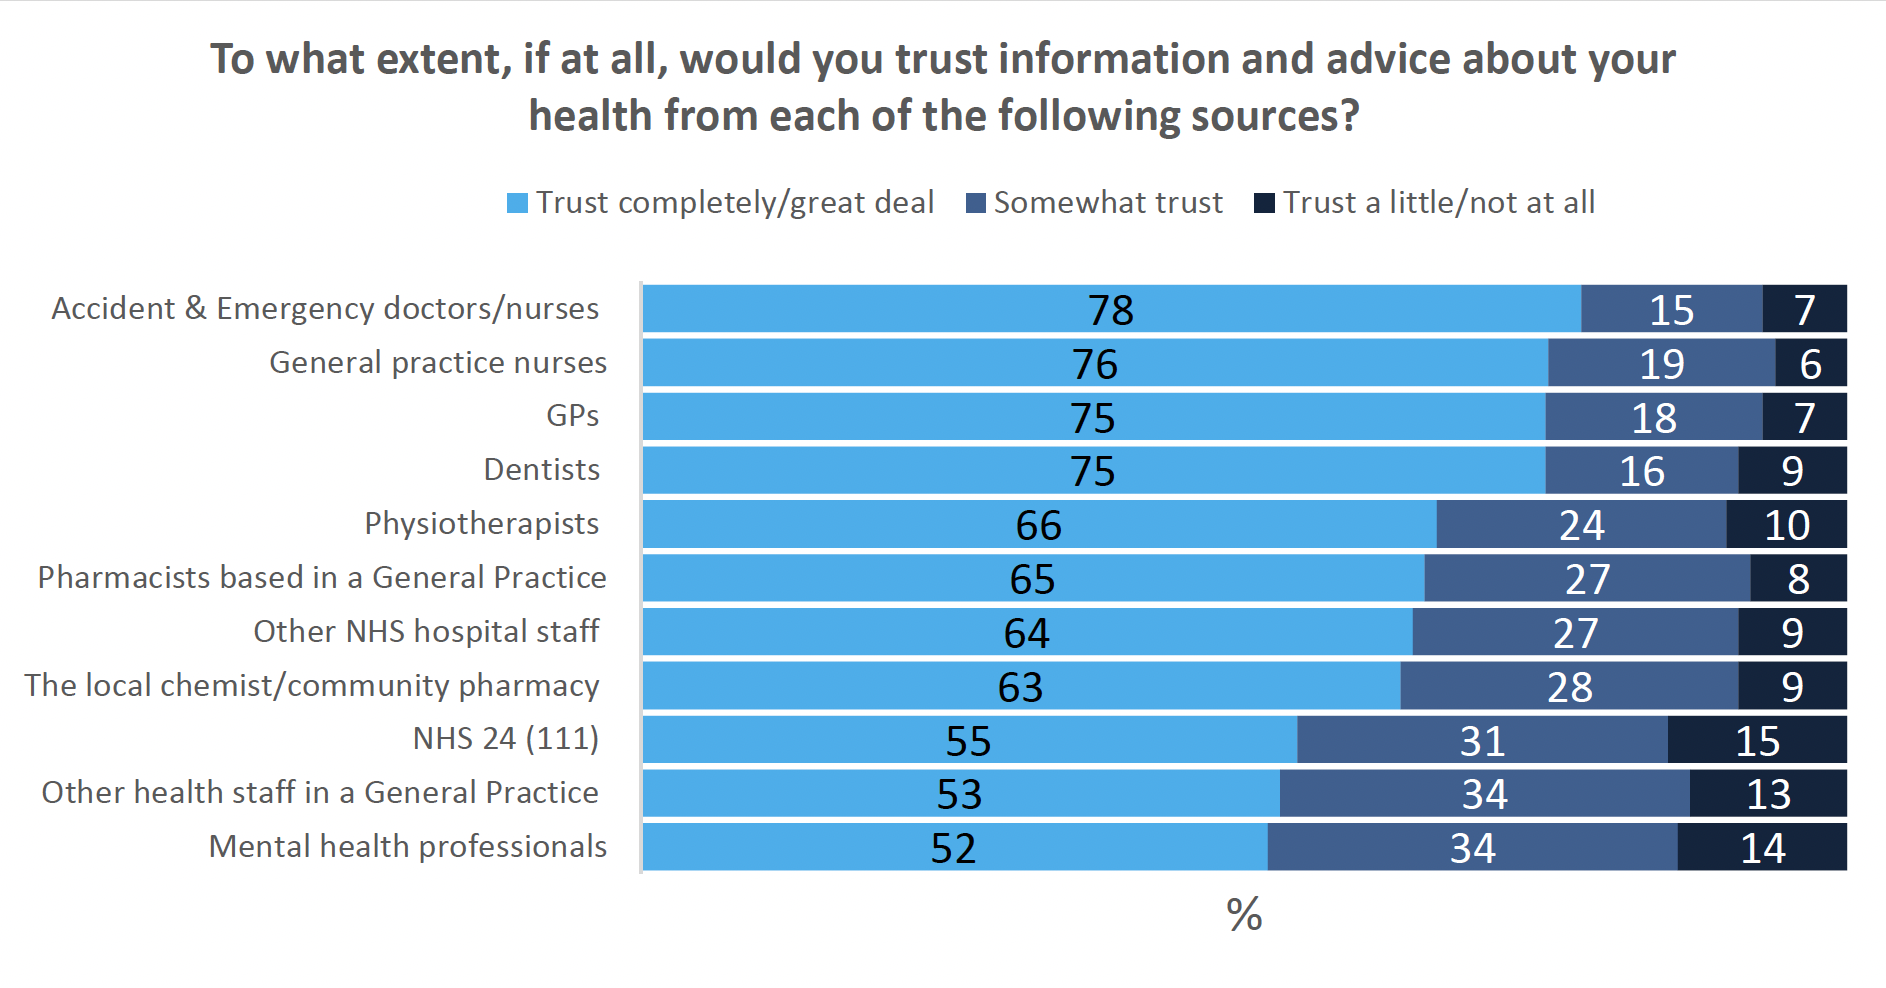 Horizontal stacked bar graph showing trust in various sources of information
This stacked bar graph shows respondents trust in different health professionals. Over 70% had trust in Accident & Emergency doctors/nurses, General practice nurses, GPs, and Dentist. Around 50% of participants had trust in NHS24 (111), Other health staff in a General Practice, and Mental health professionals. Trust in Physiotherapists, Pharmacists based in a General Practice, Other NHS hospital staff, and The local chemist/community pharmacy were between 63-66%.